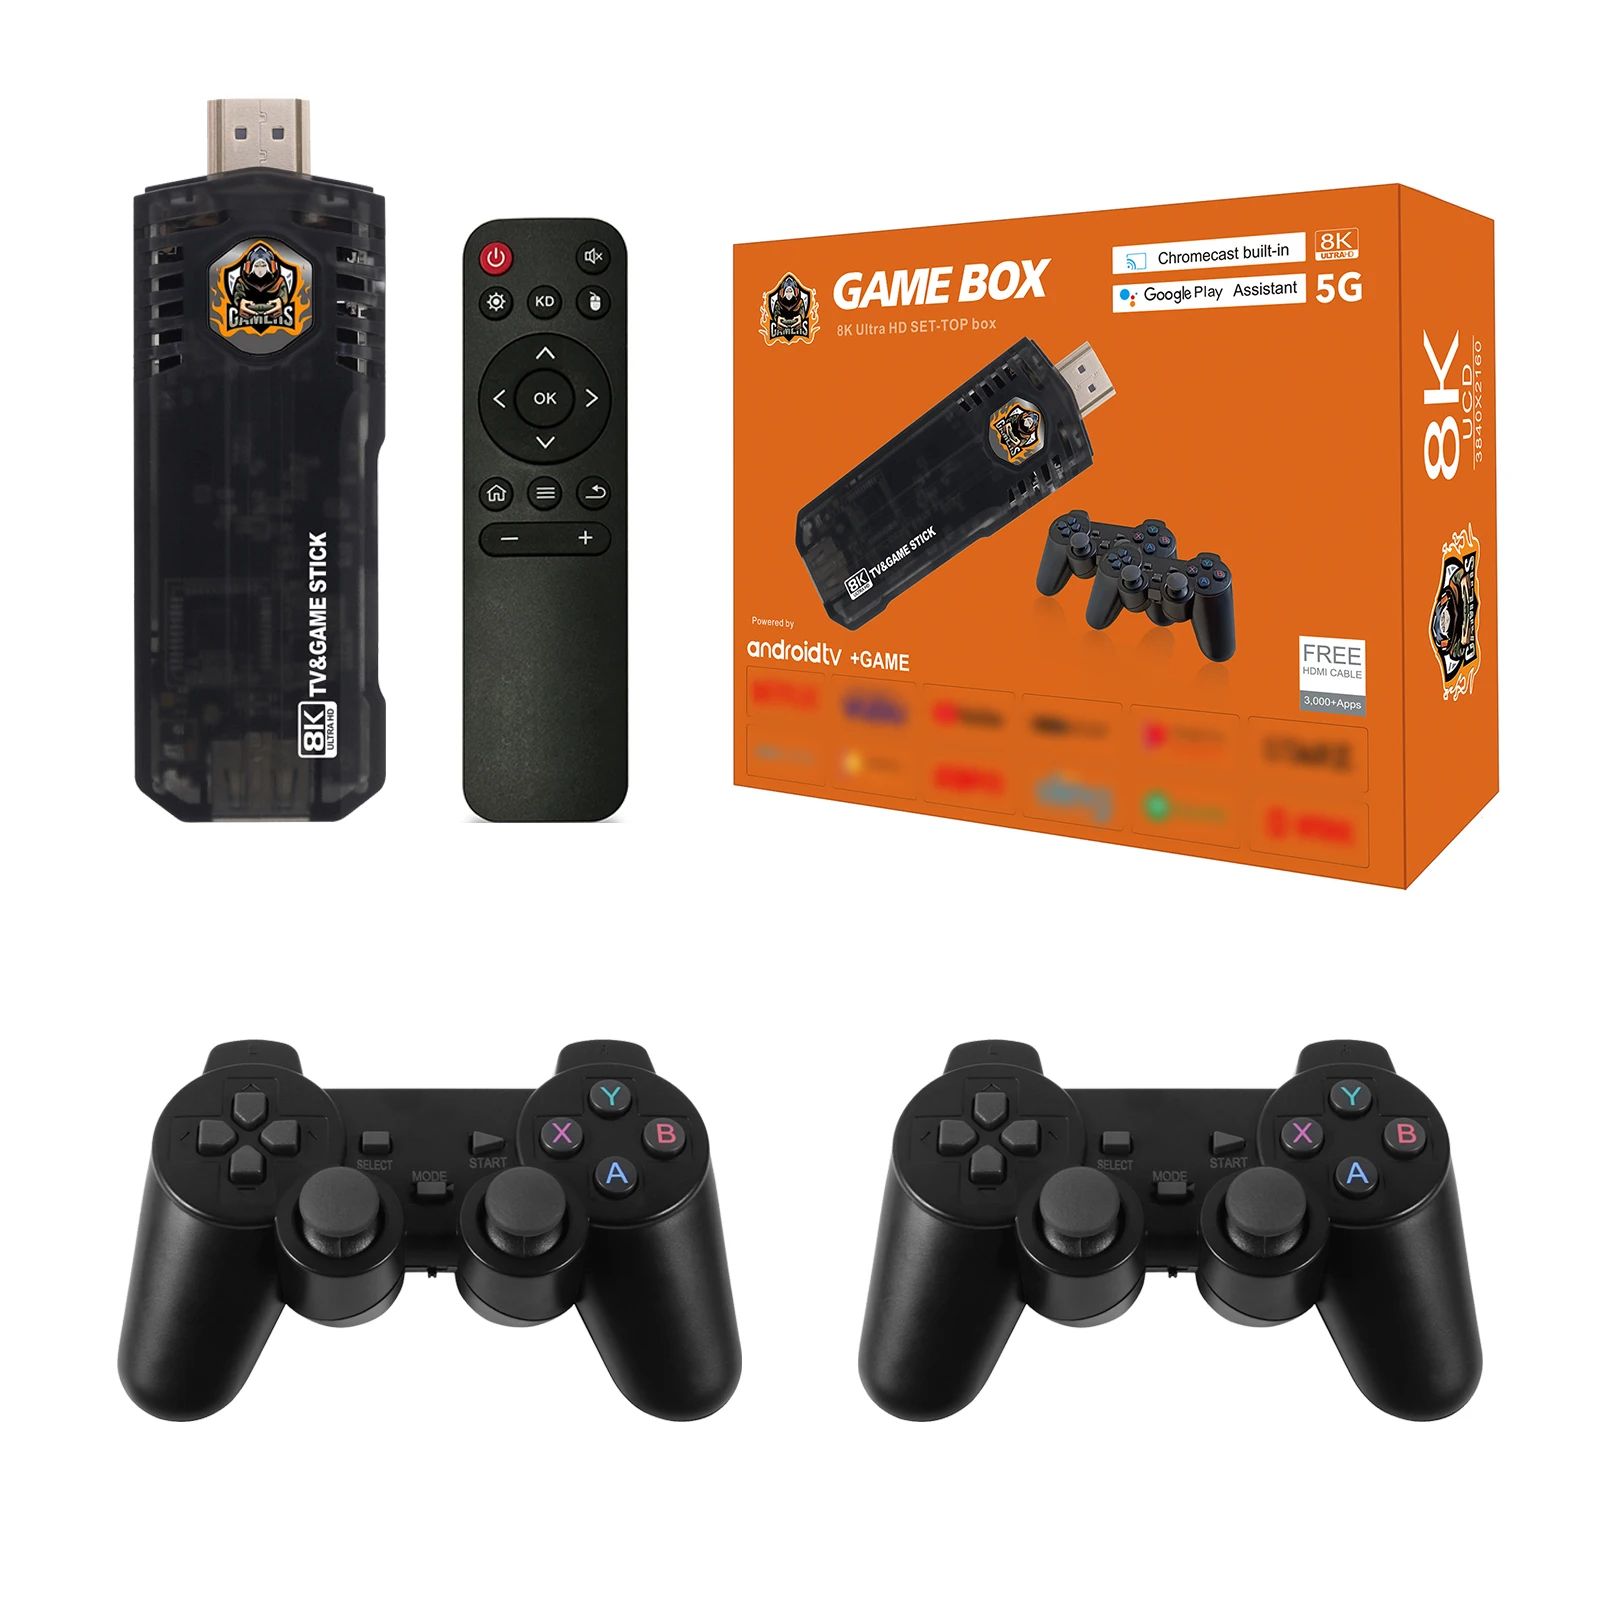 Game TV Box M8 Pro Mini Android and Game Dual System with 10000+ Retor Game  Wireless Controllers 100M 4K TV Box 